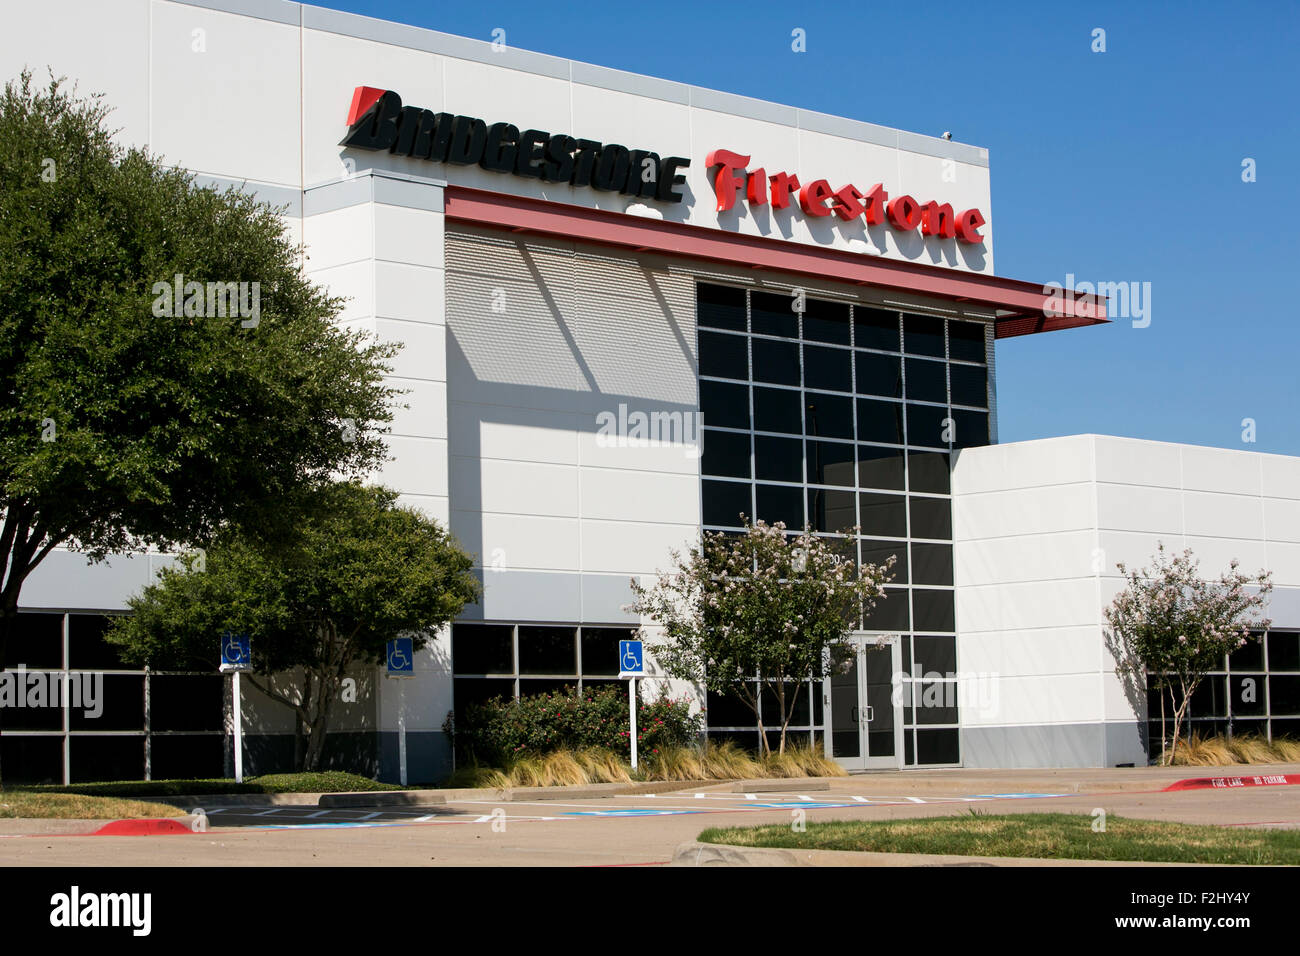 A logo sign outside of a facility occupied by the Bridgestone Corporation in Roanoke, Texas on September 13, 2015. Stock Photo